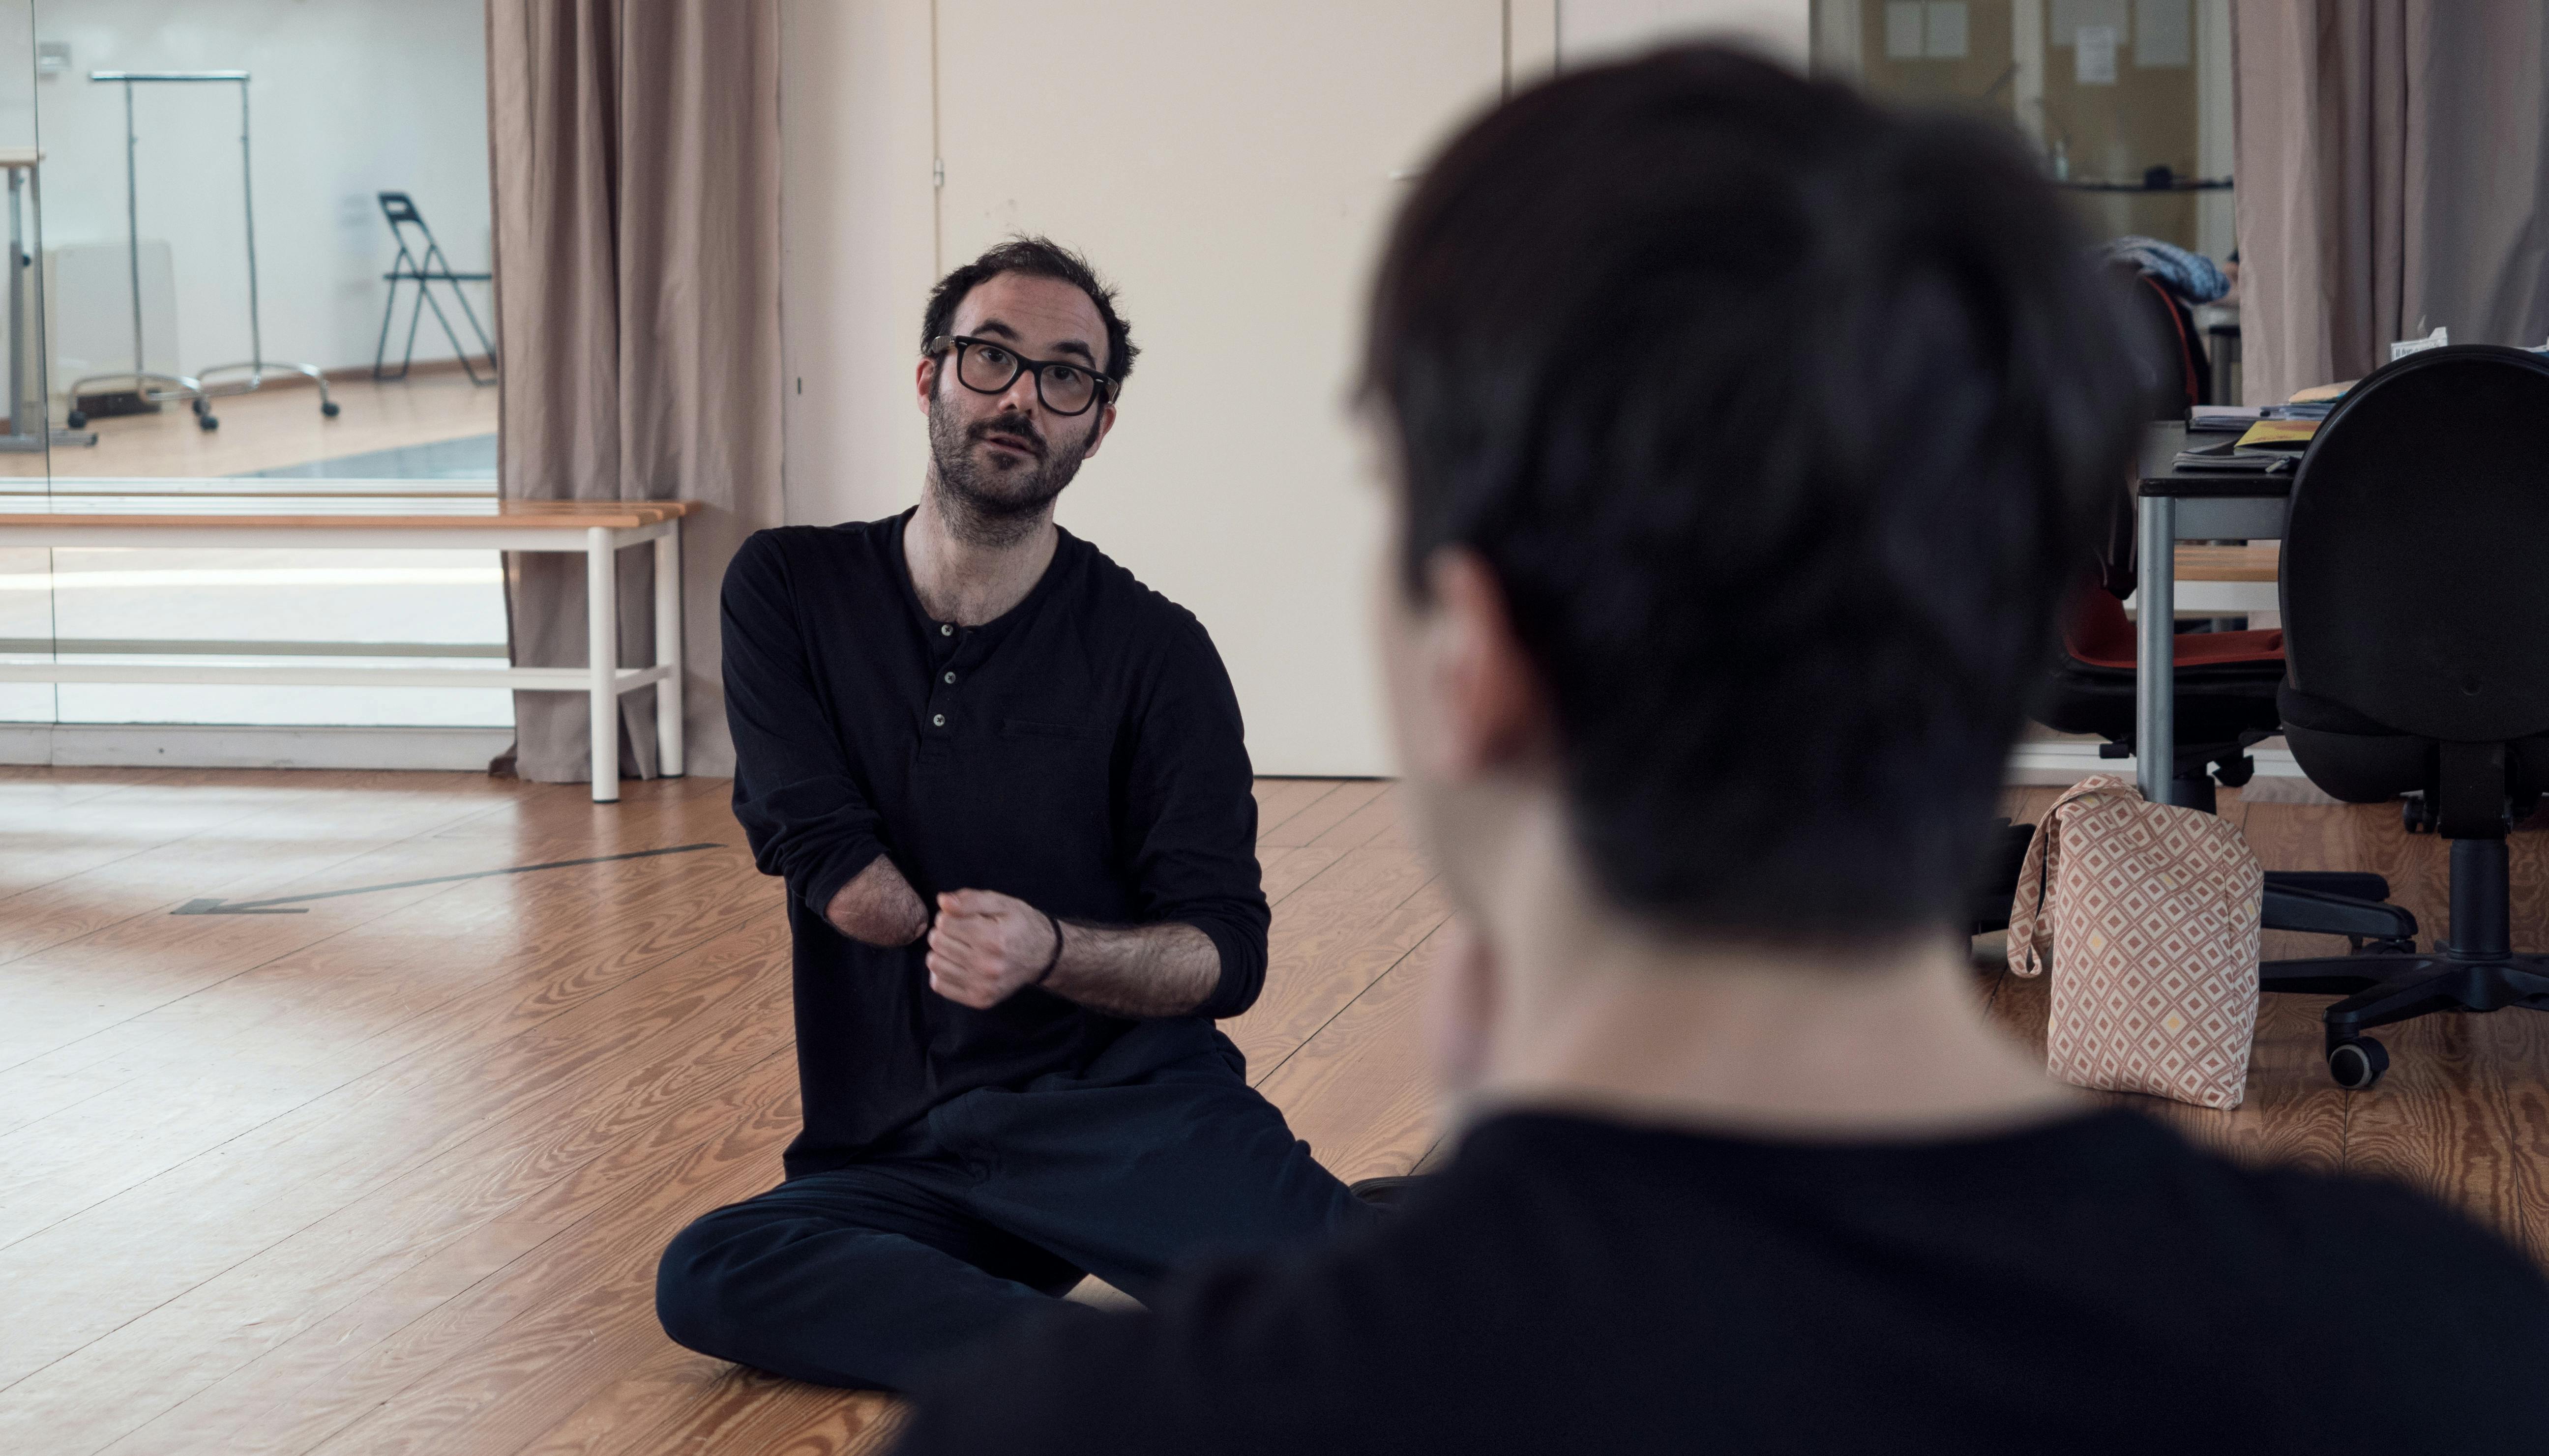 Aristide Rontini, seated on the floor in the Studio, speaks to the dancer Cristian Cucco, seated in front of him.